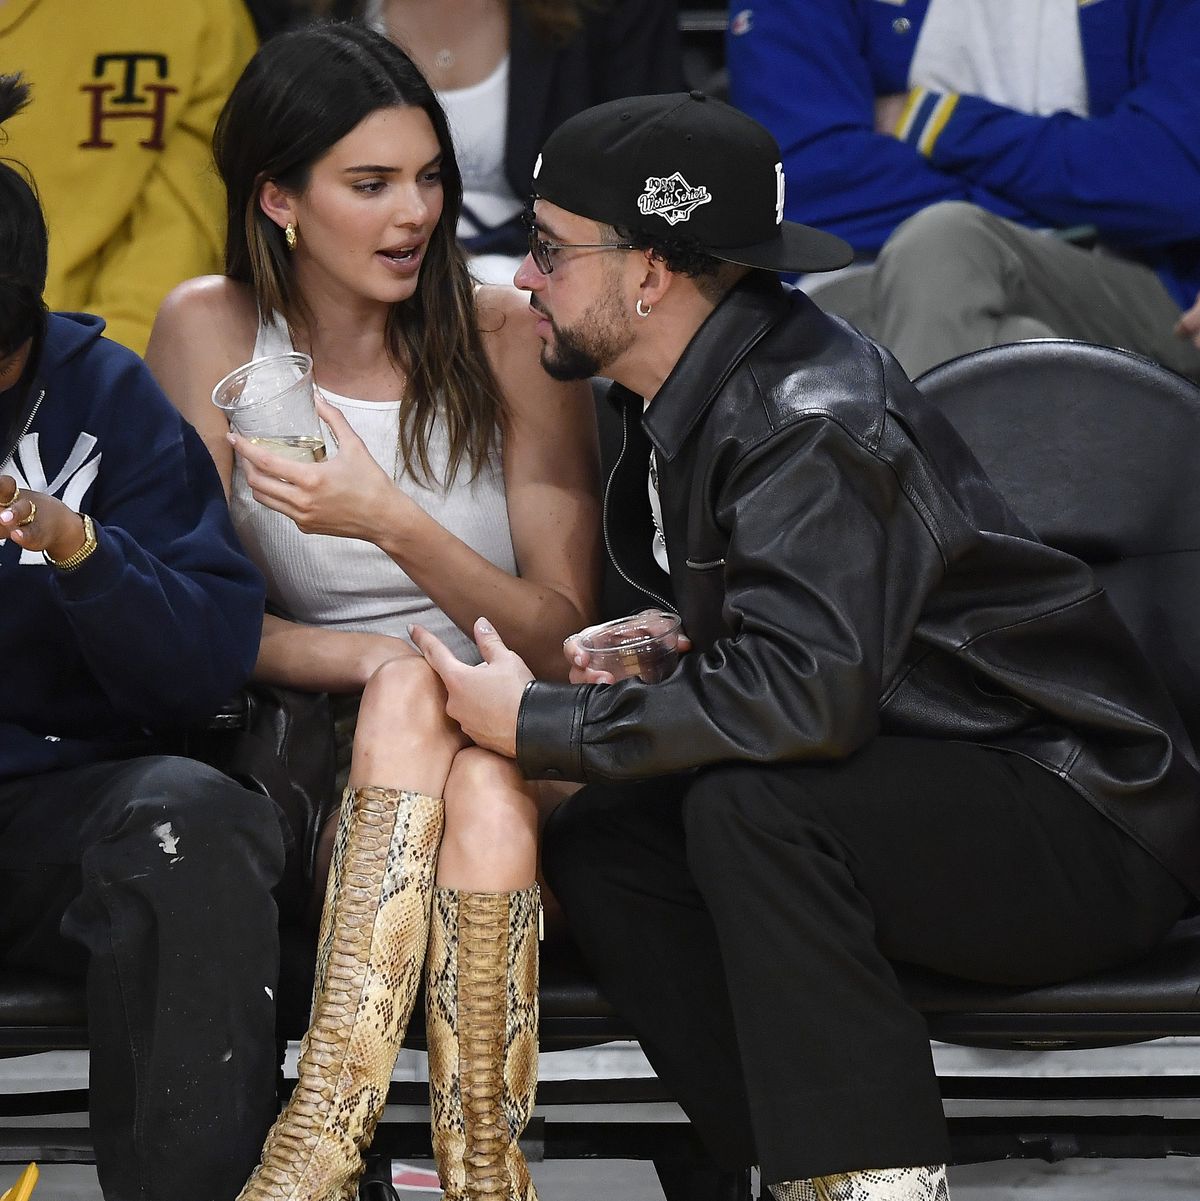 Why Bad Bunny and Kendall Jenner Broke Up 